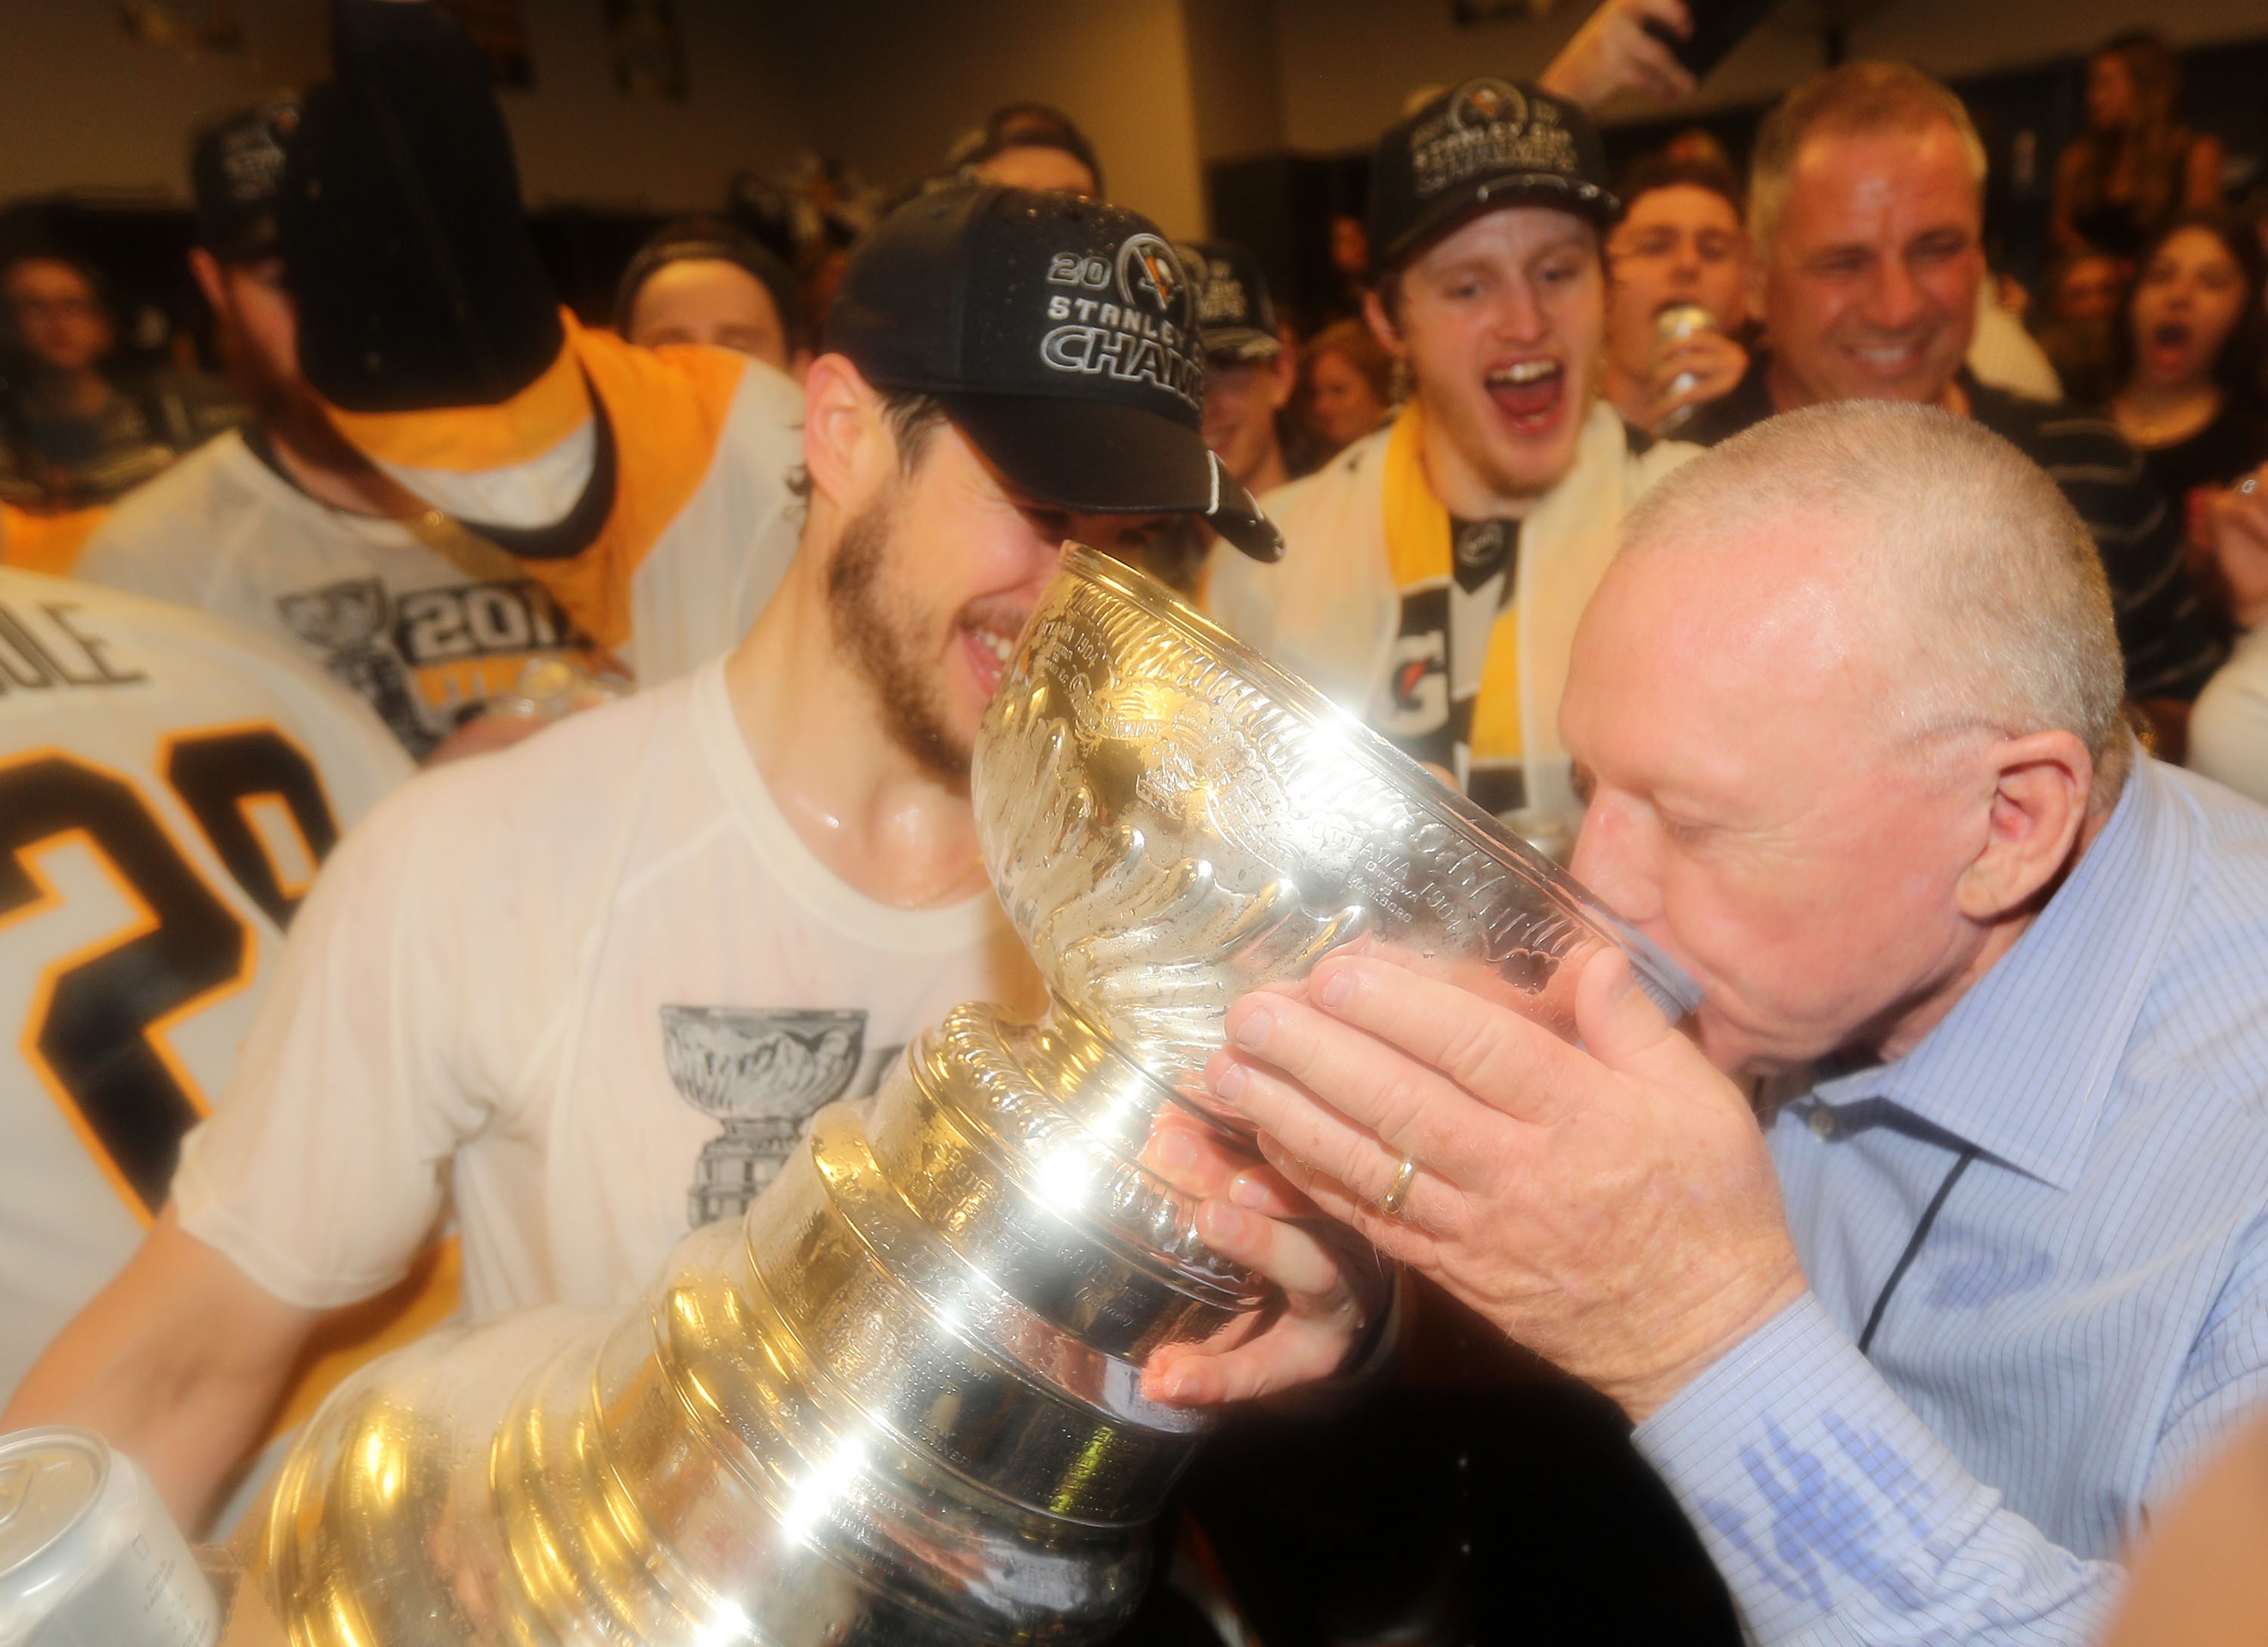 https://video-images.vice.com/articles/593eaa73b0af205df1f4a57a/lede/1497279621478-jim-rutherford-stanley-cup-2017.jpeg